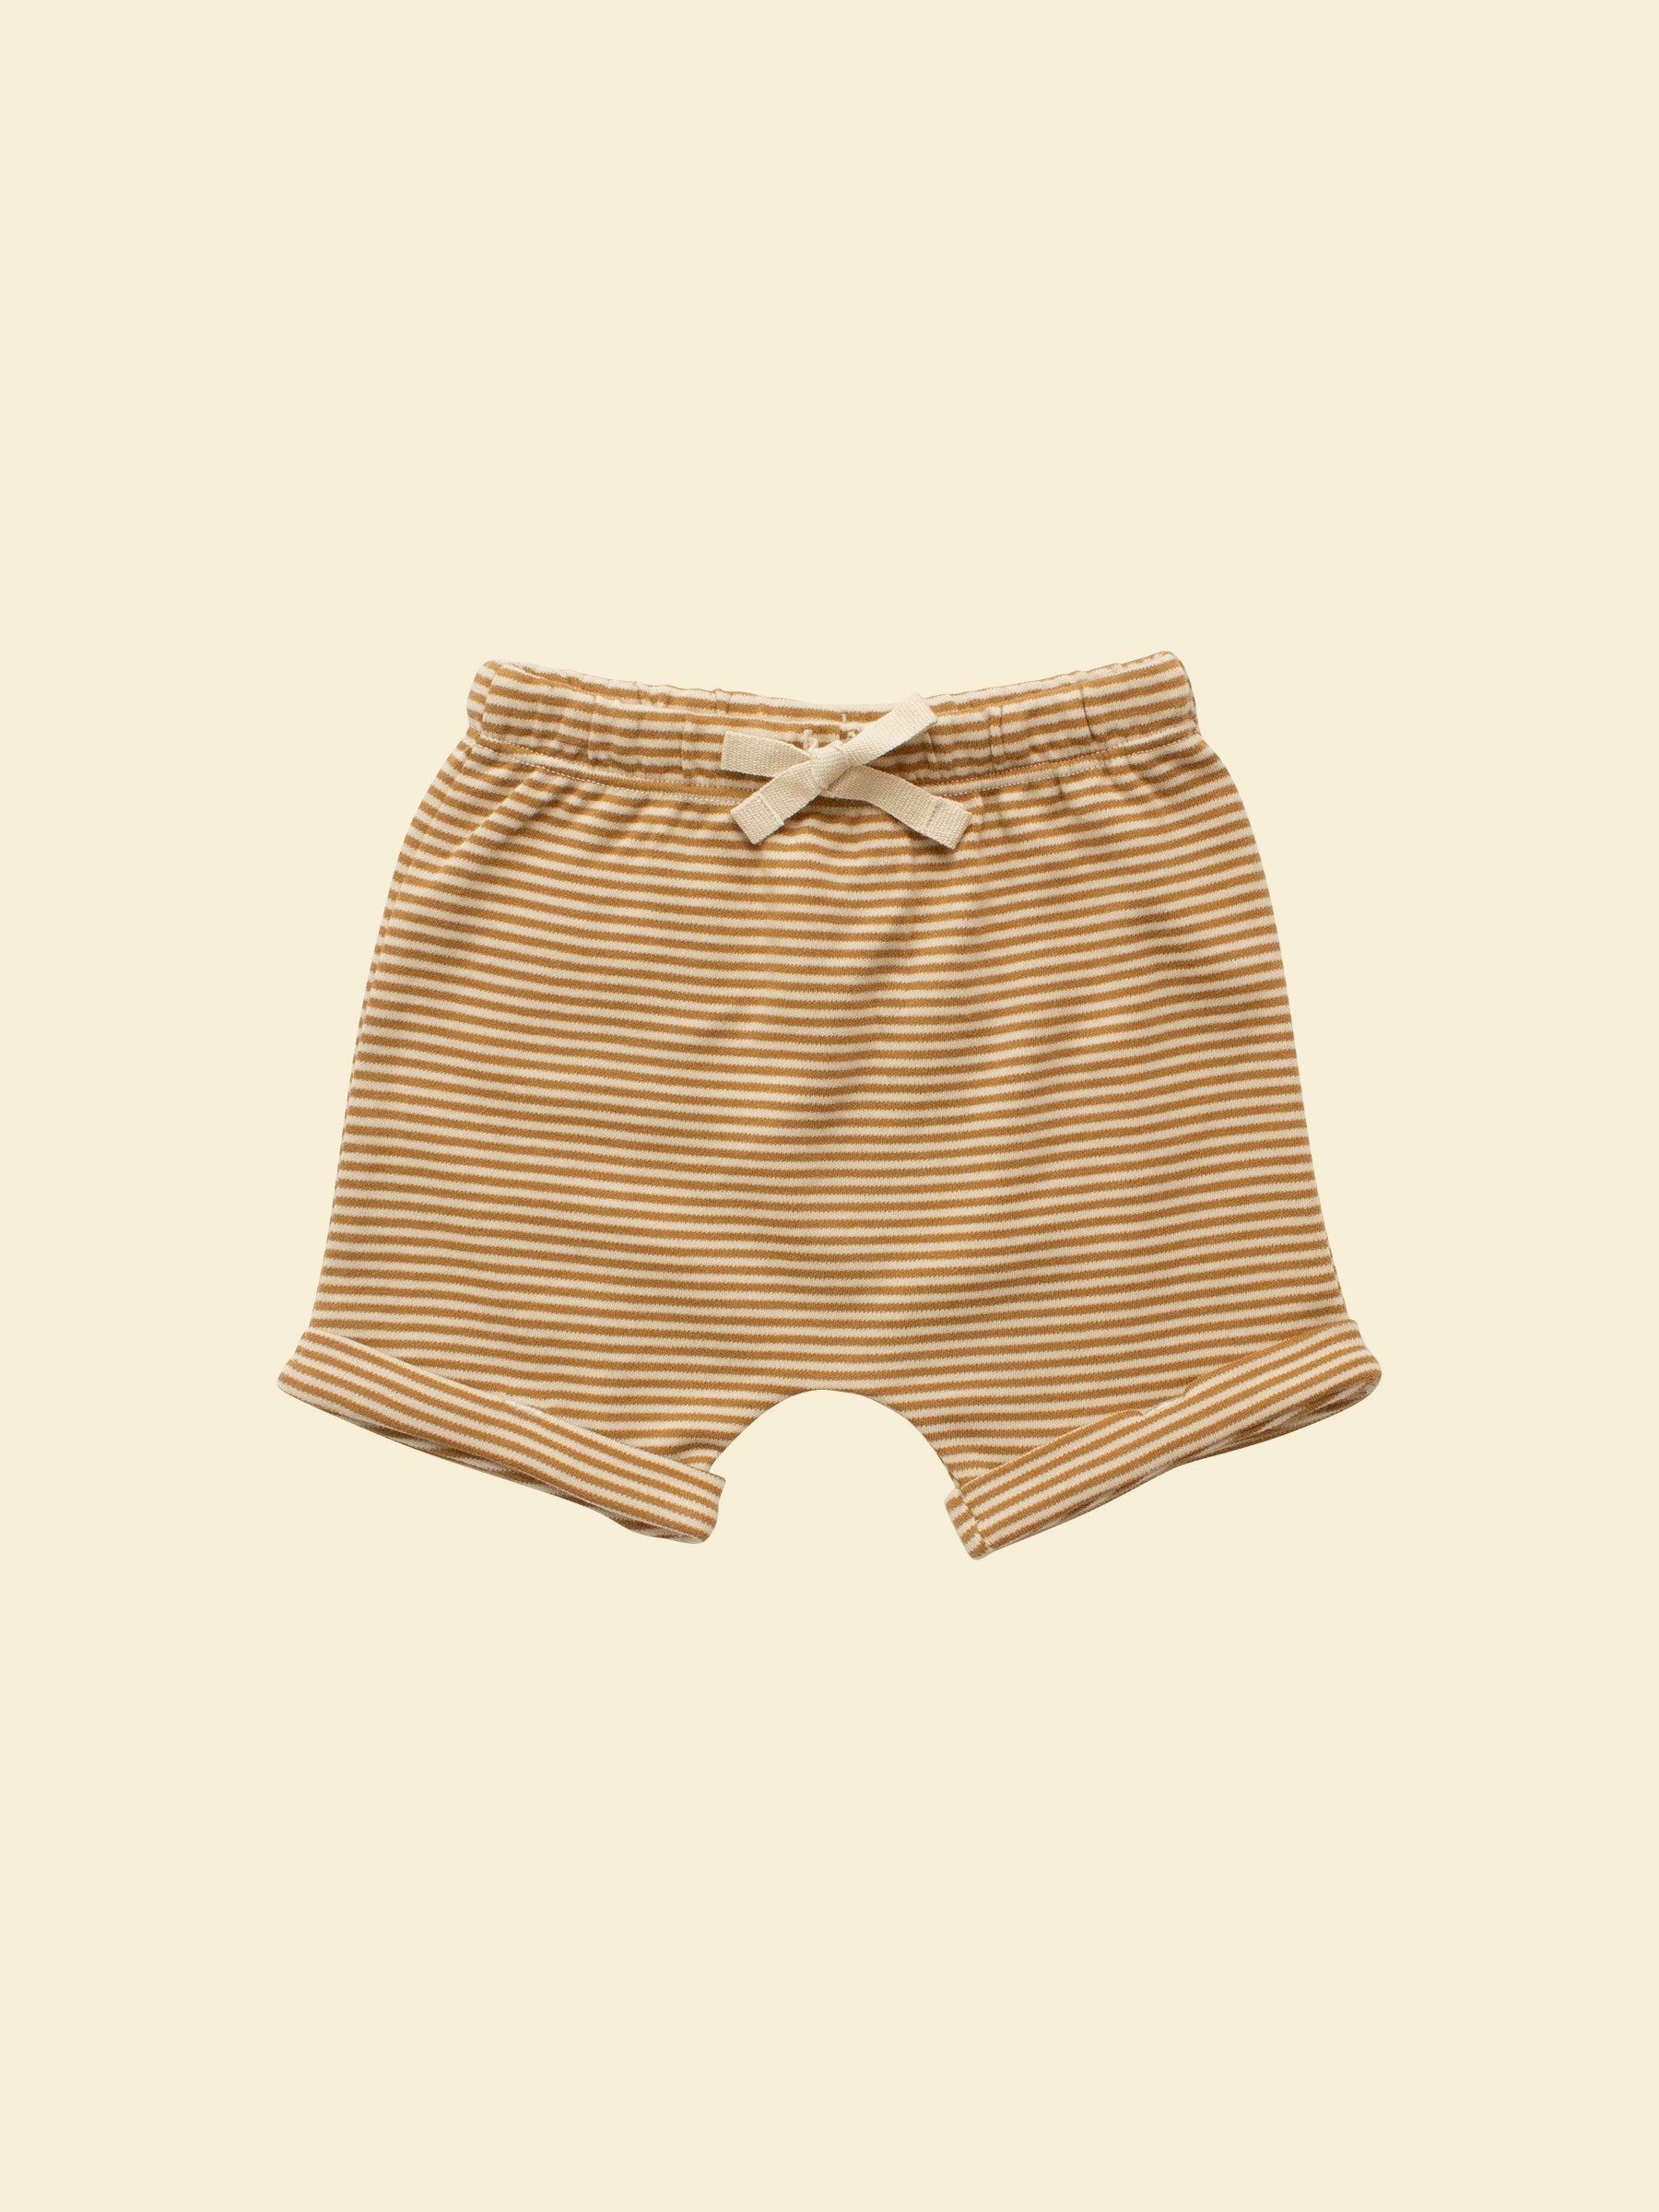 Pants & Shorts | Earth-friendly Clothing for Baby & Child | Ziwi Baby